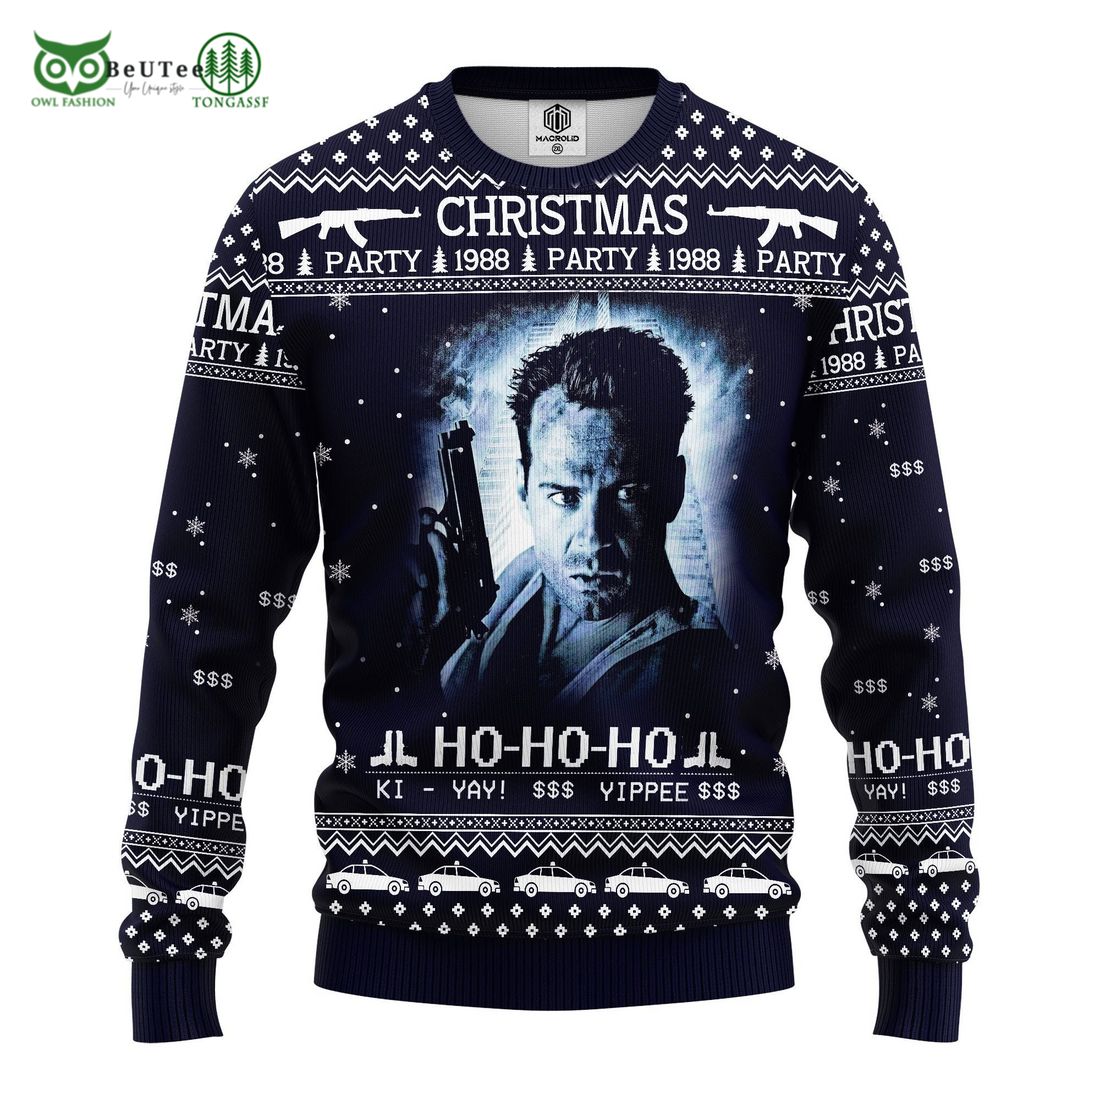 die hard 1988 ugly knitted christmas sweater 1 wsToT